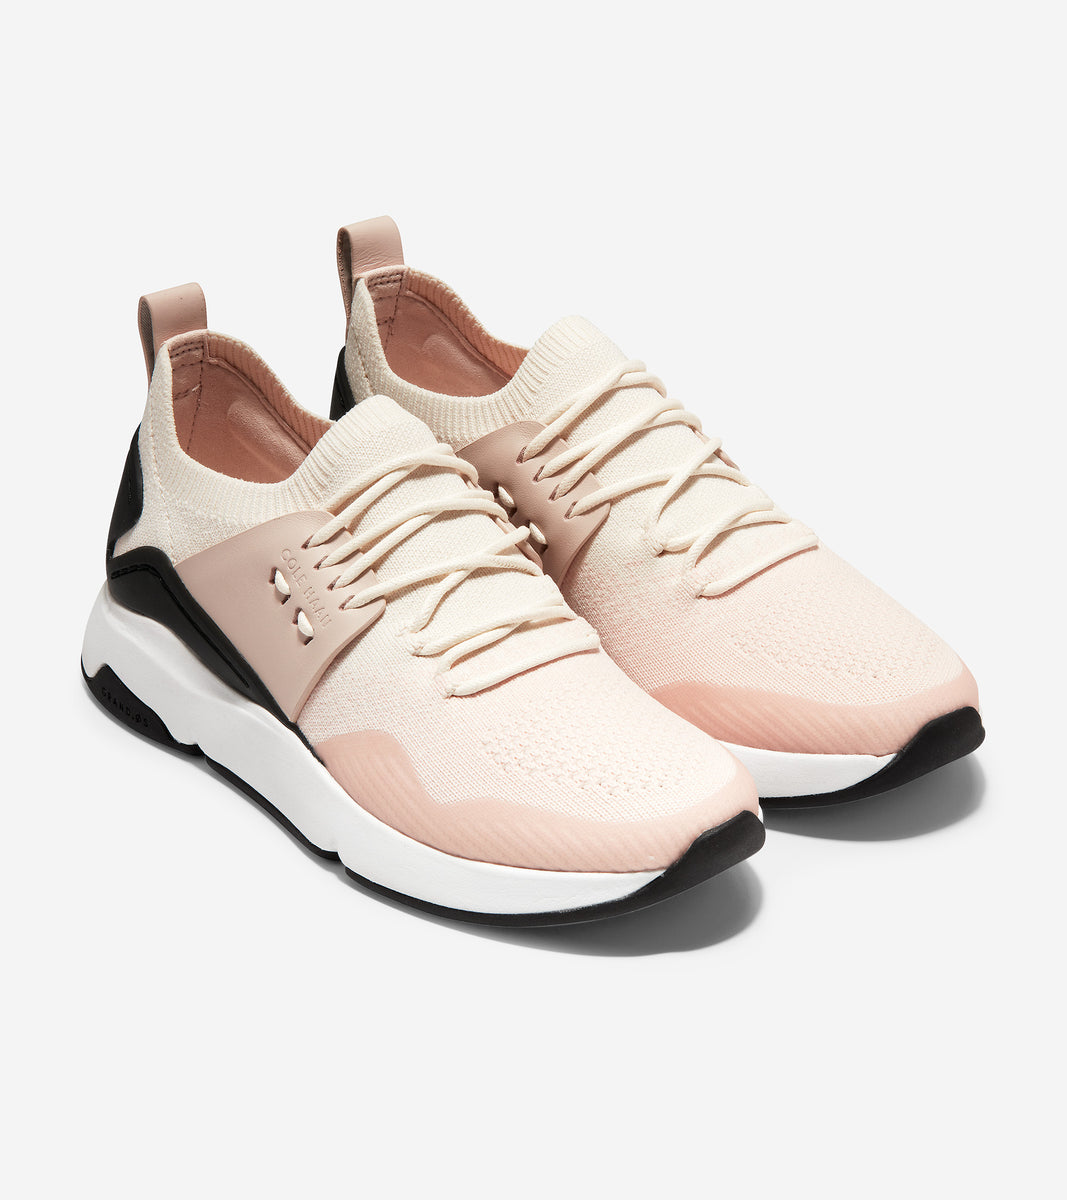 ColeHaan-ZERØGRAND All-Day Trainer-w18361-Ivory-Peach Blush